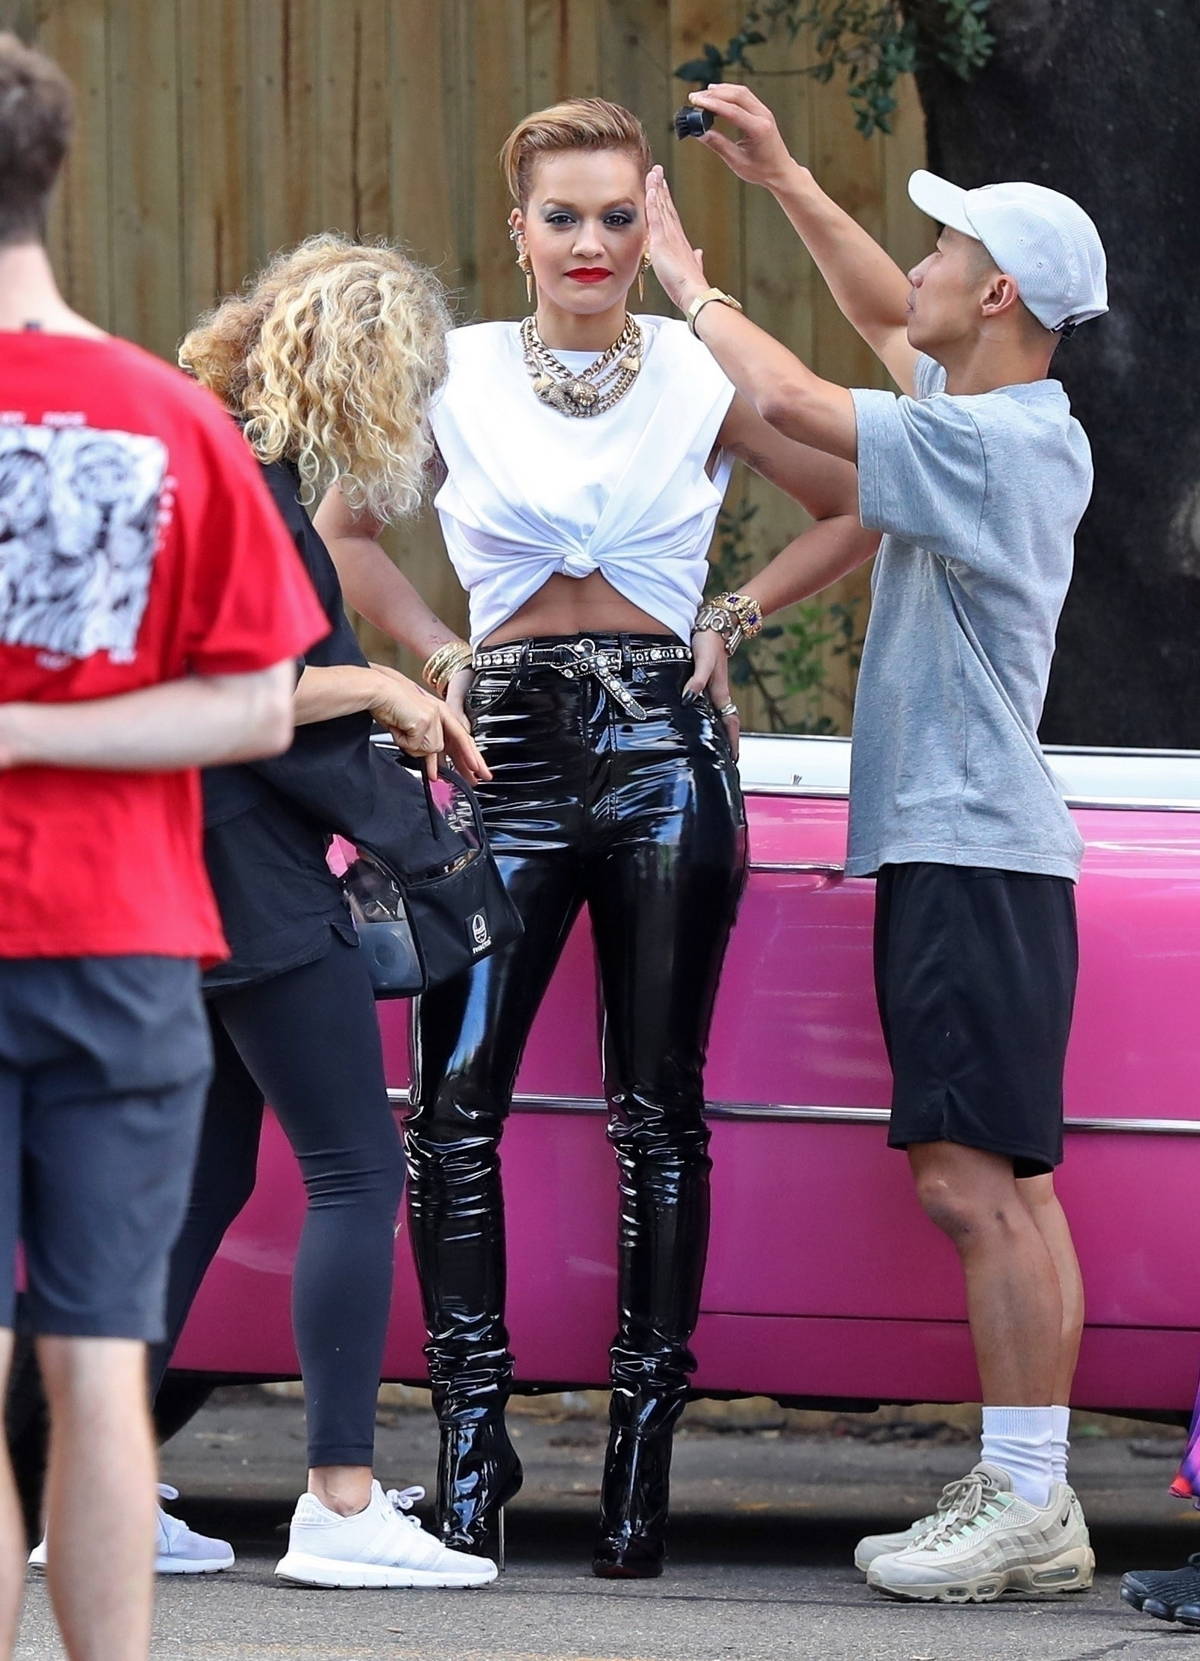 rita ora stuns in skin-tight leather pants while posing with a bright pink  vintage car for a photoshoot in sydney, australia-260321_2